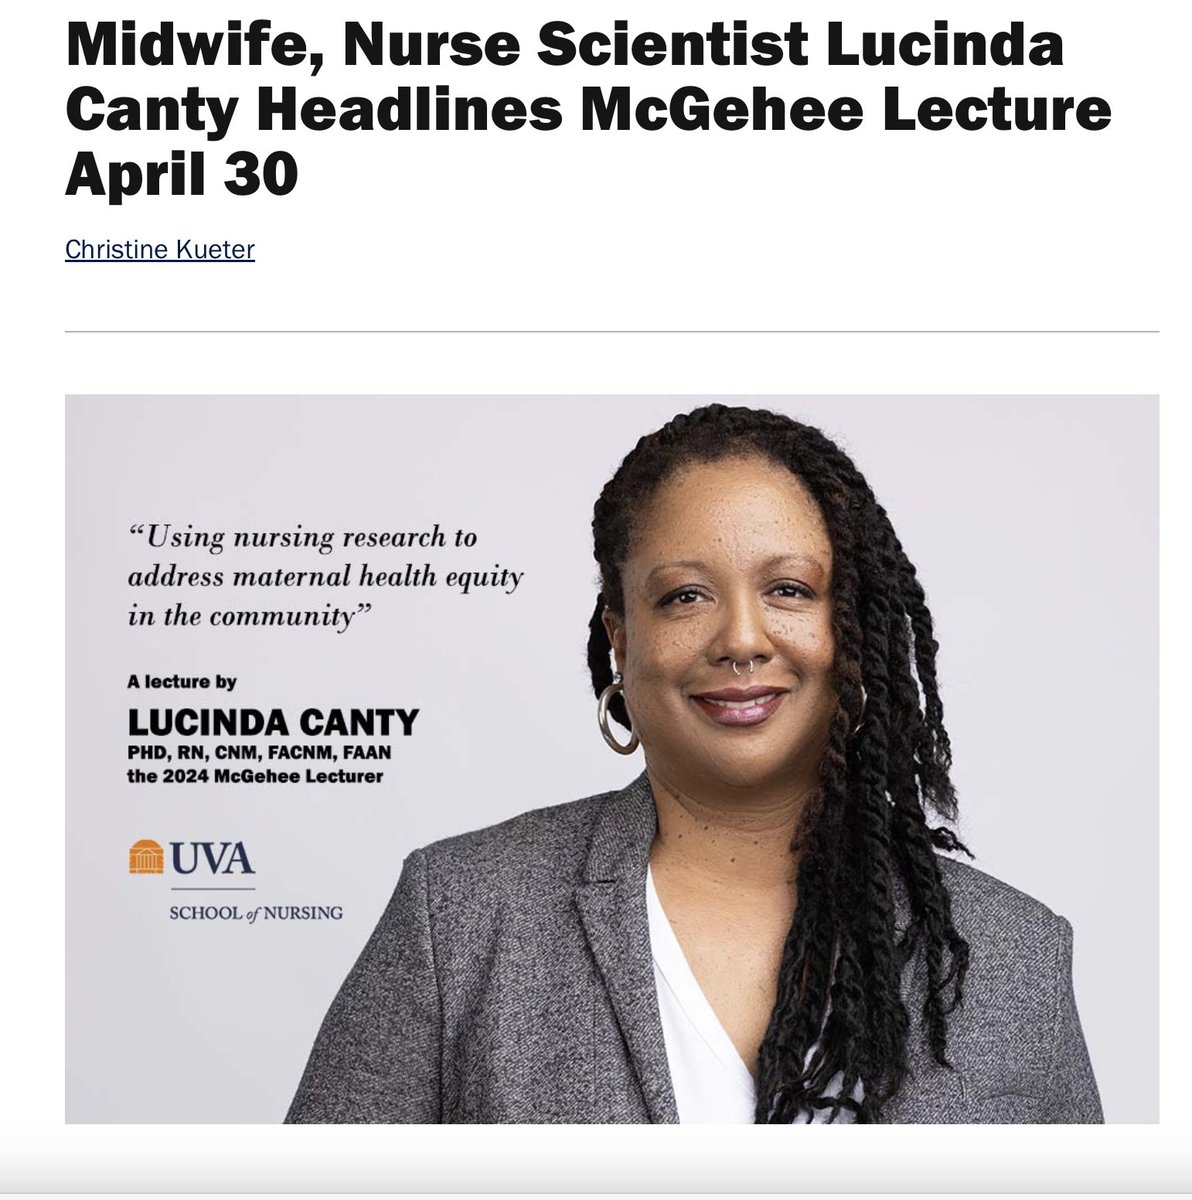 Happening in a few days! Cannot wait to discuss my research and community initiatives. You will see what drives my passion and understand why and how I do what I do. @UVA School of Nursing, @UMassAmherst Elaine Marieb College of Nursing #maternalhealthequity